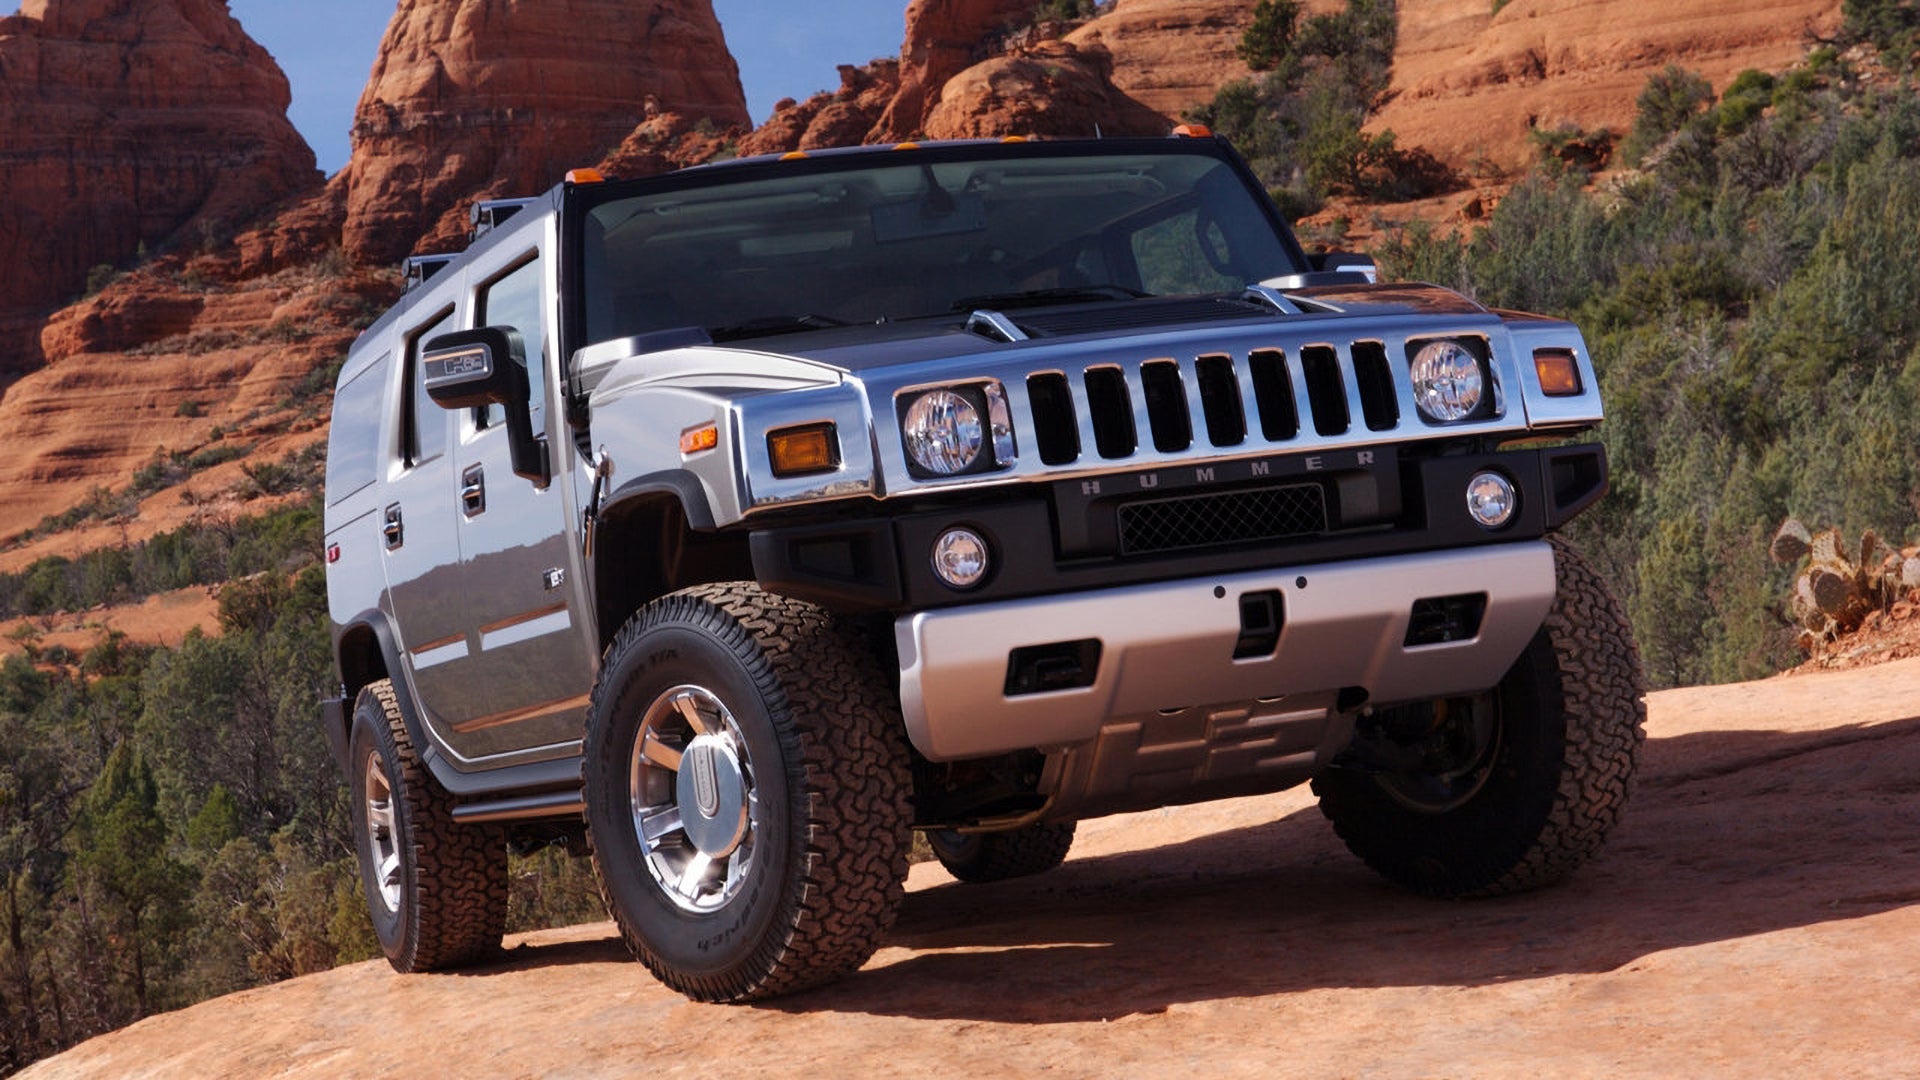 Talks of Electric Hummer Brand Revival Heat up as GM Works on New UAW Deal: Report